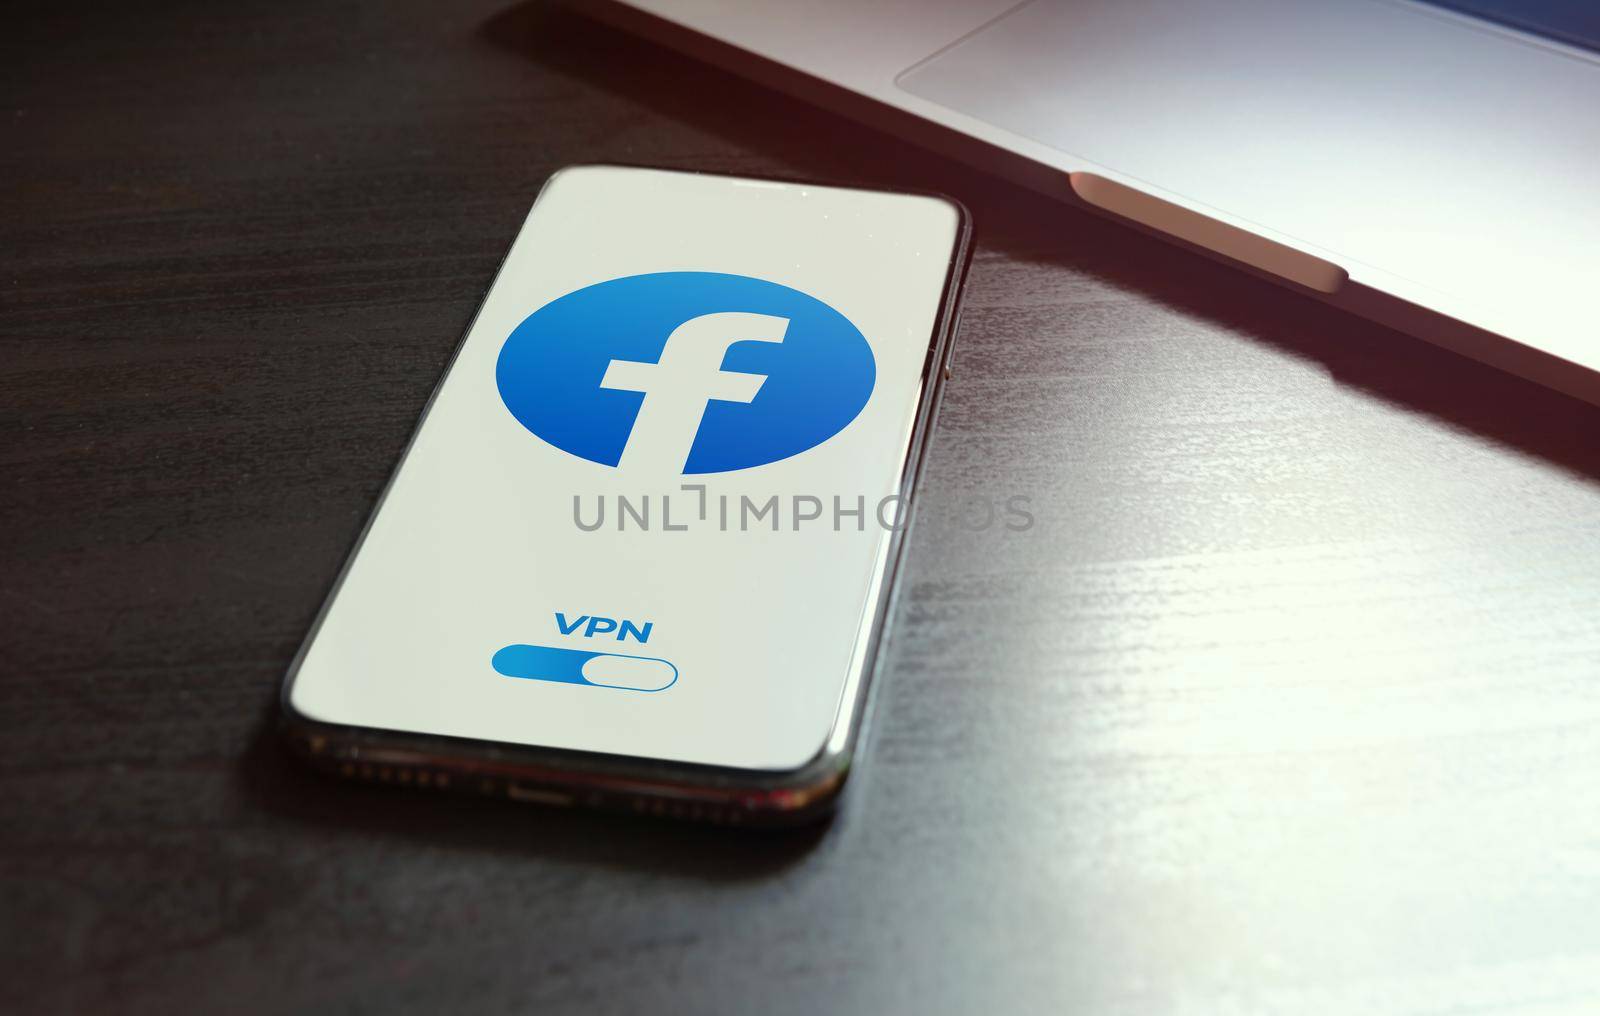 MOSCOW, RUSSIA - MAY 03, 2022: iphone lying on a wooden table, on the screen Facebook social application logo, which starts only after turning on the vpn connection. Government censorship concept by bestforbest